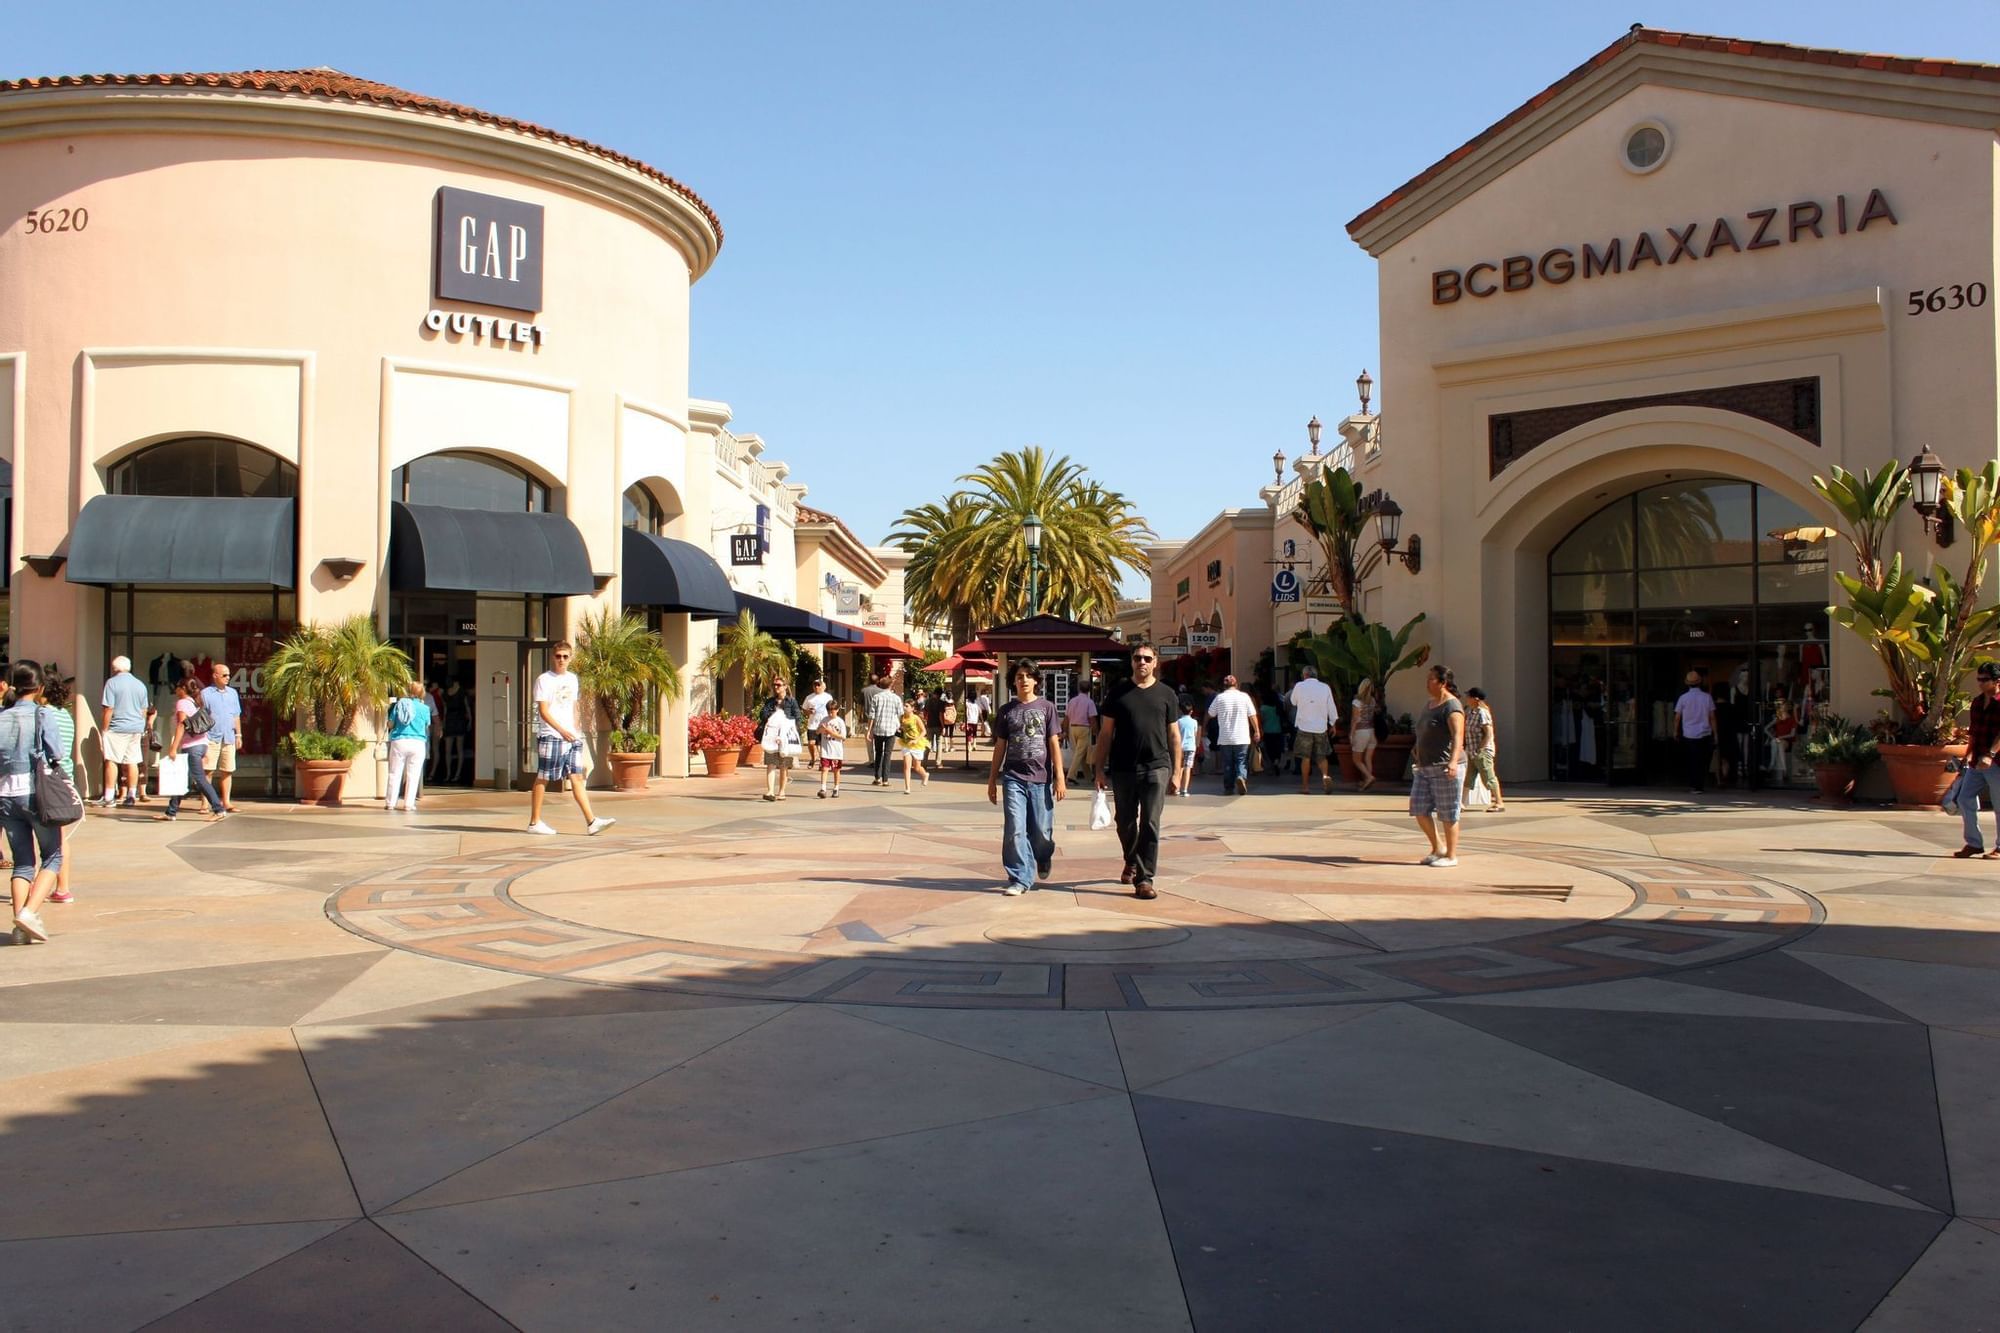 carlsbad outlets nike store